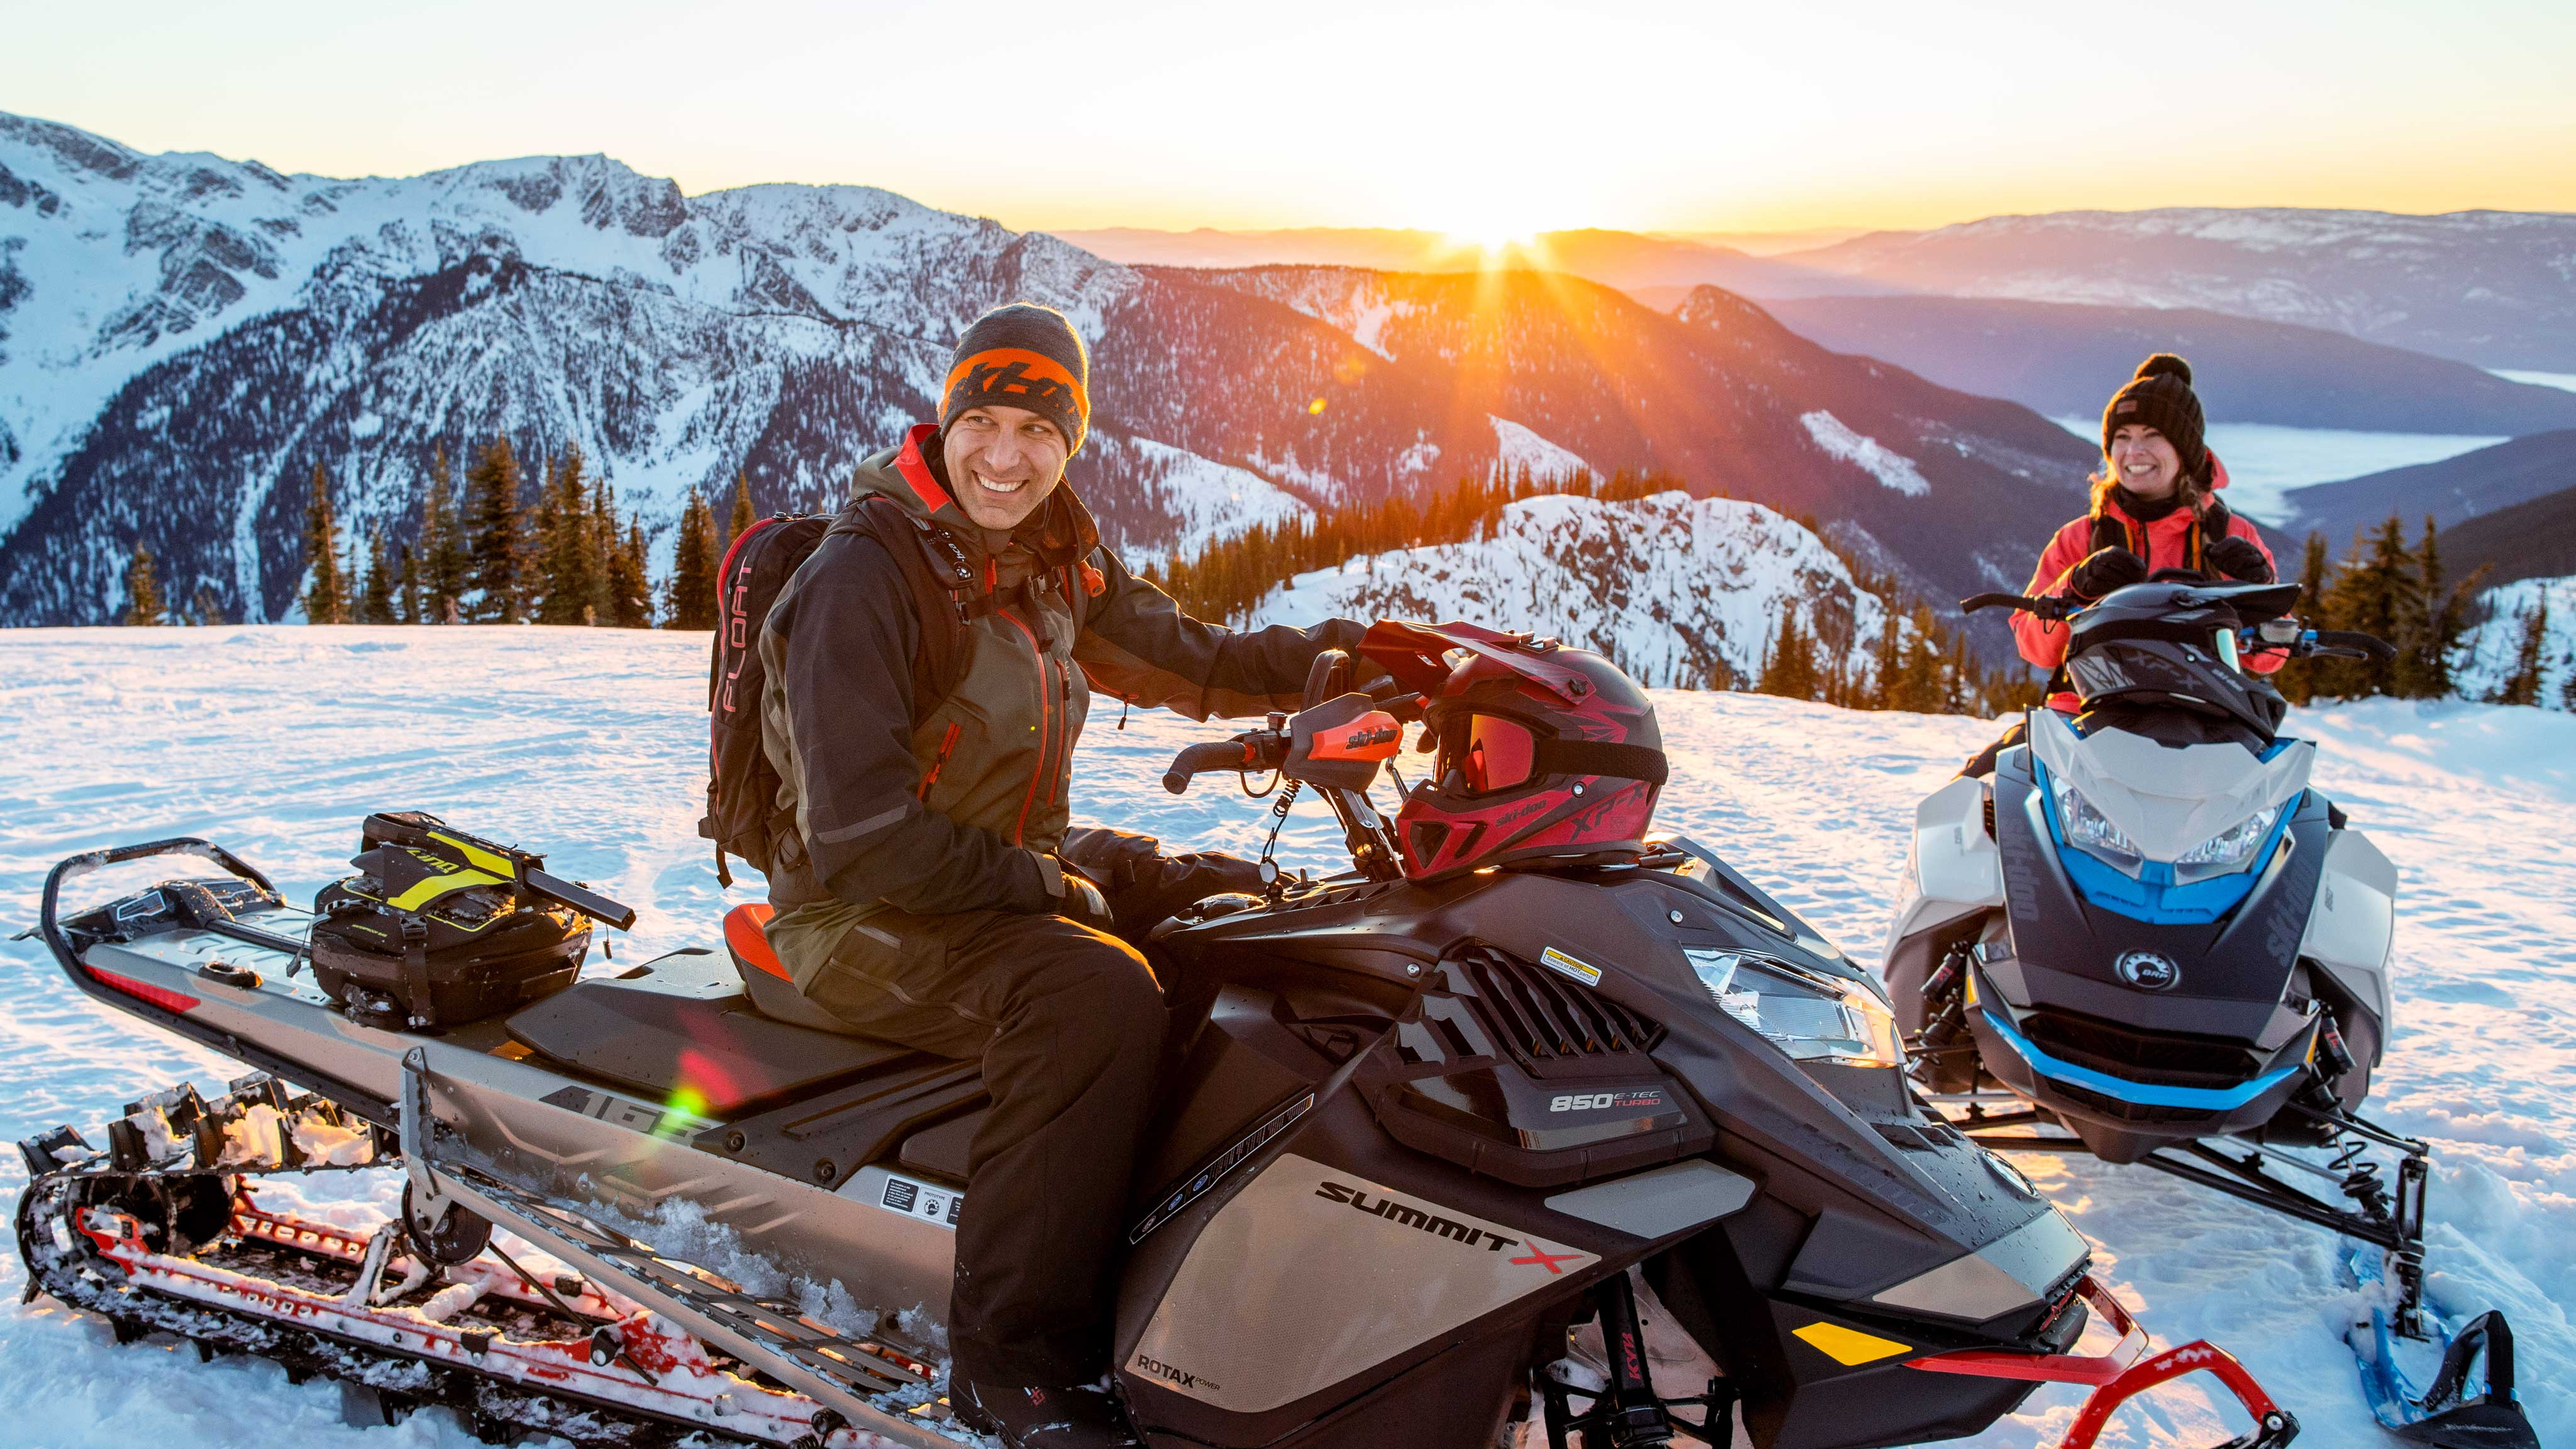 Couple enjoying a Snowmobile backcountry ride at sunset